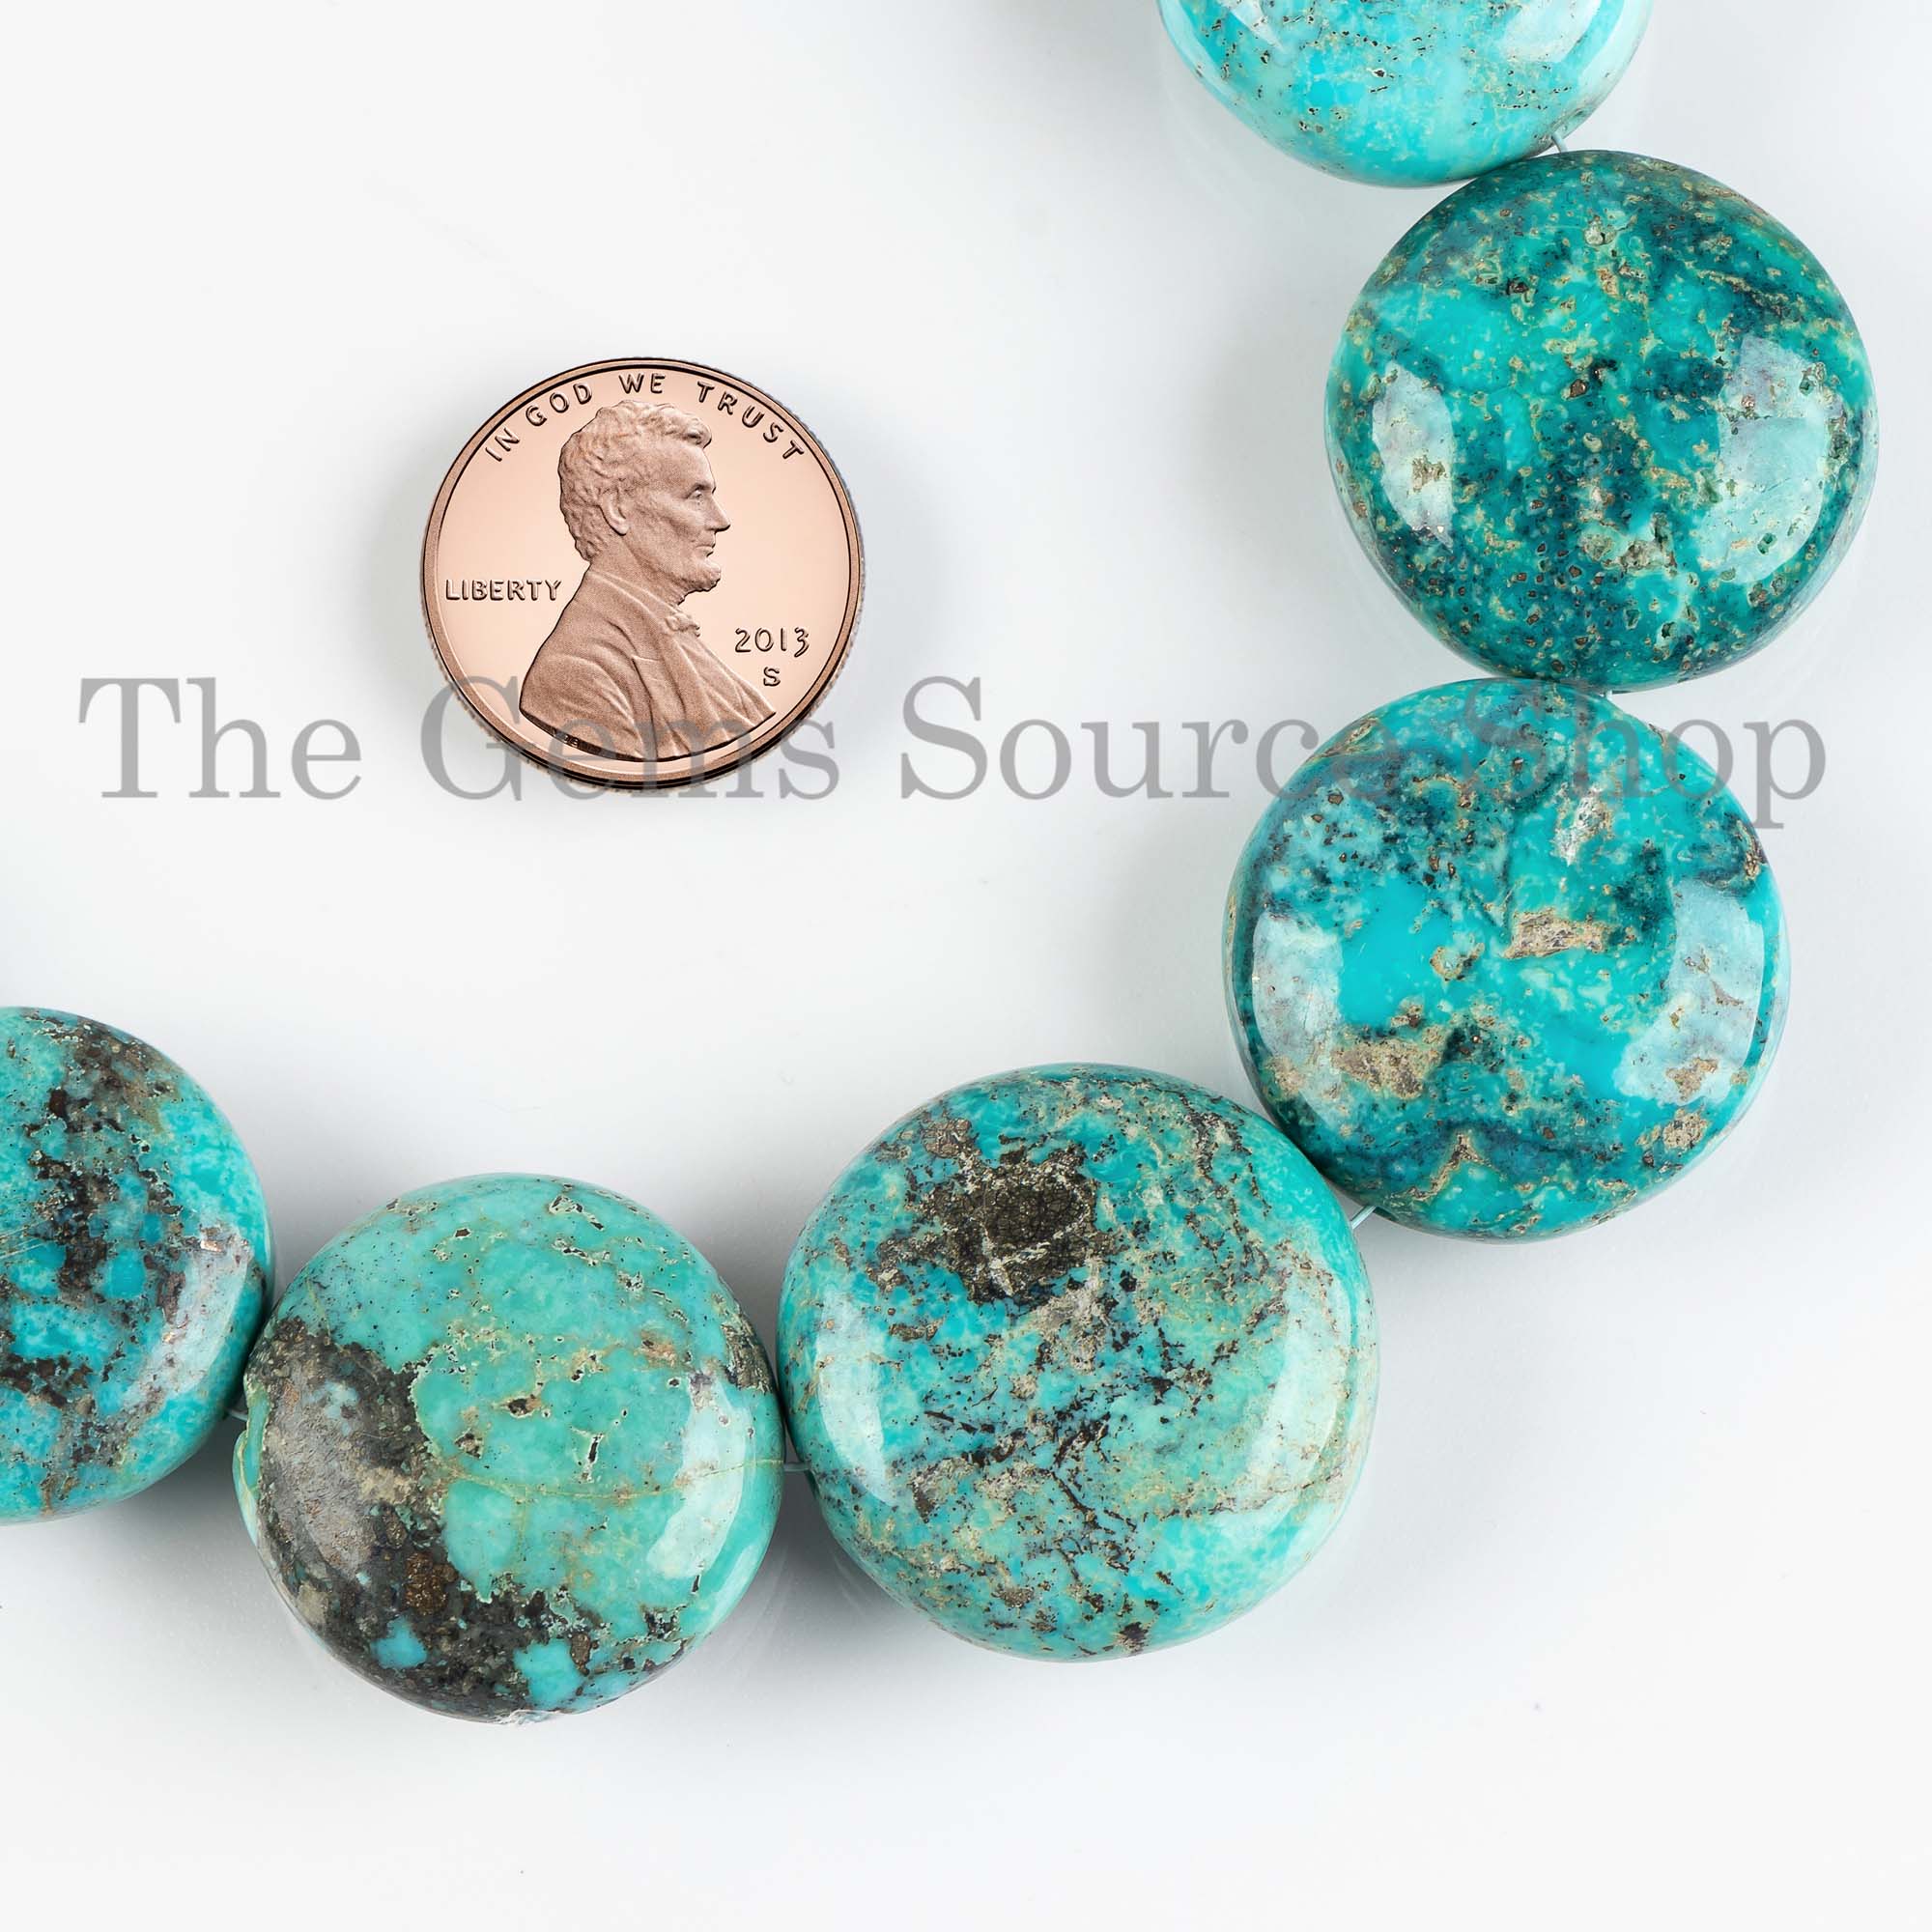 18-23mm Turquoise Smooth Coin Briolette, Turquoise Beads, Plain Turquoise Gemstone Beads, Turquoise Coin Beads, Turquoise Strand Wholesale